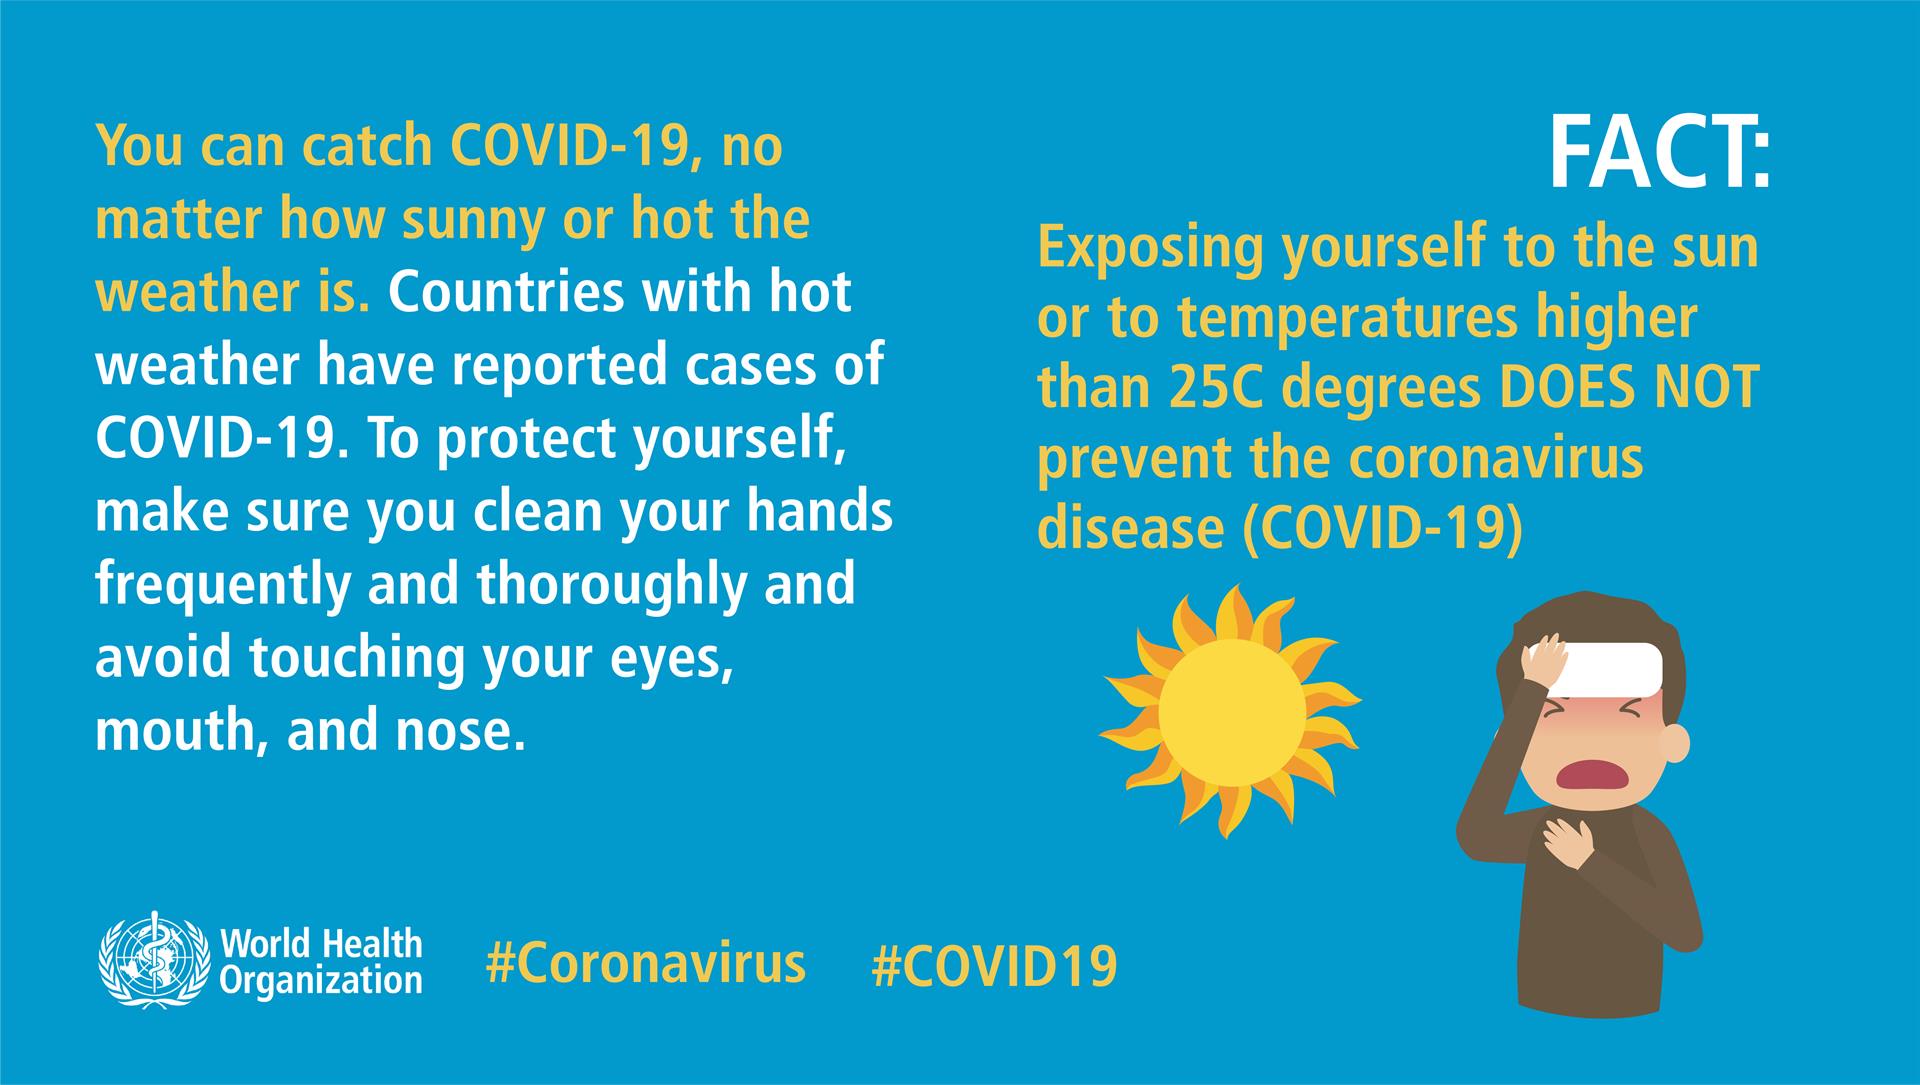 Myths and Facts about COVID-19